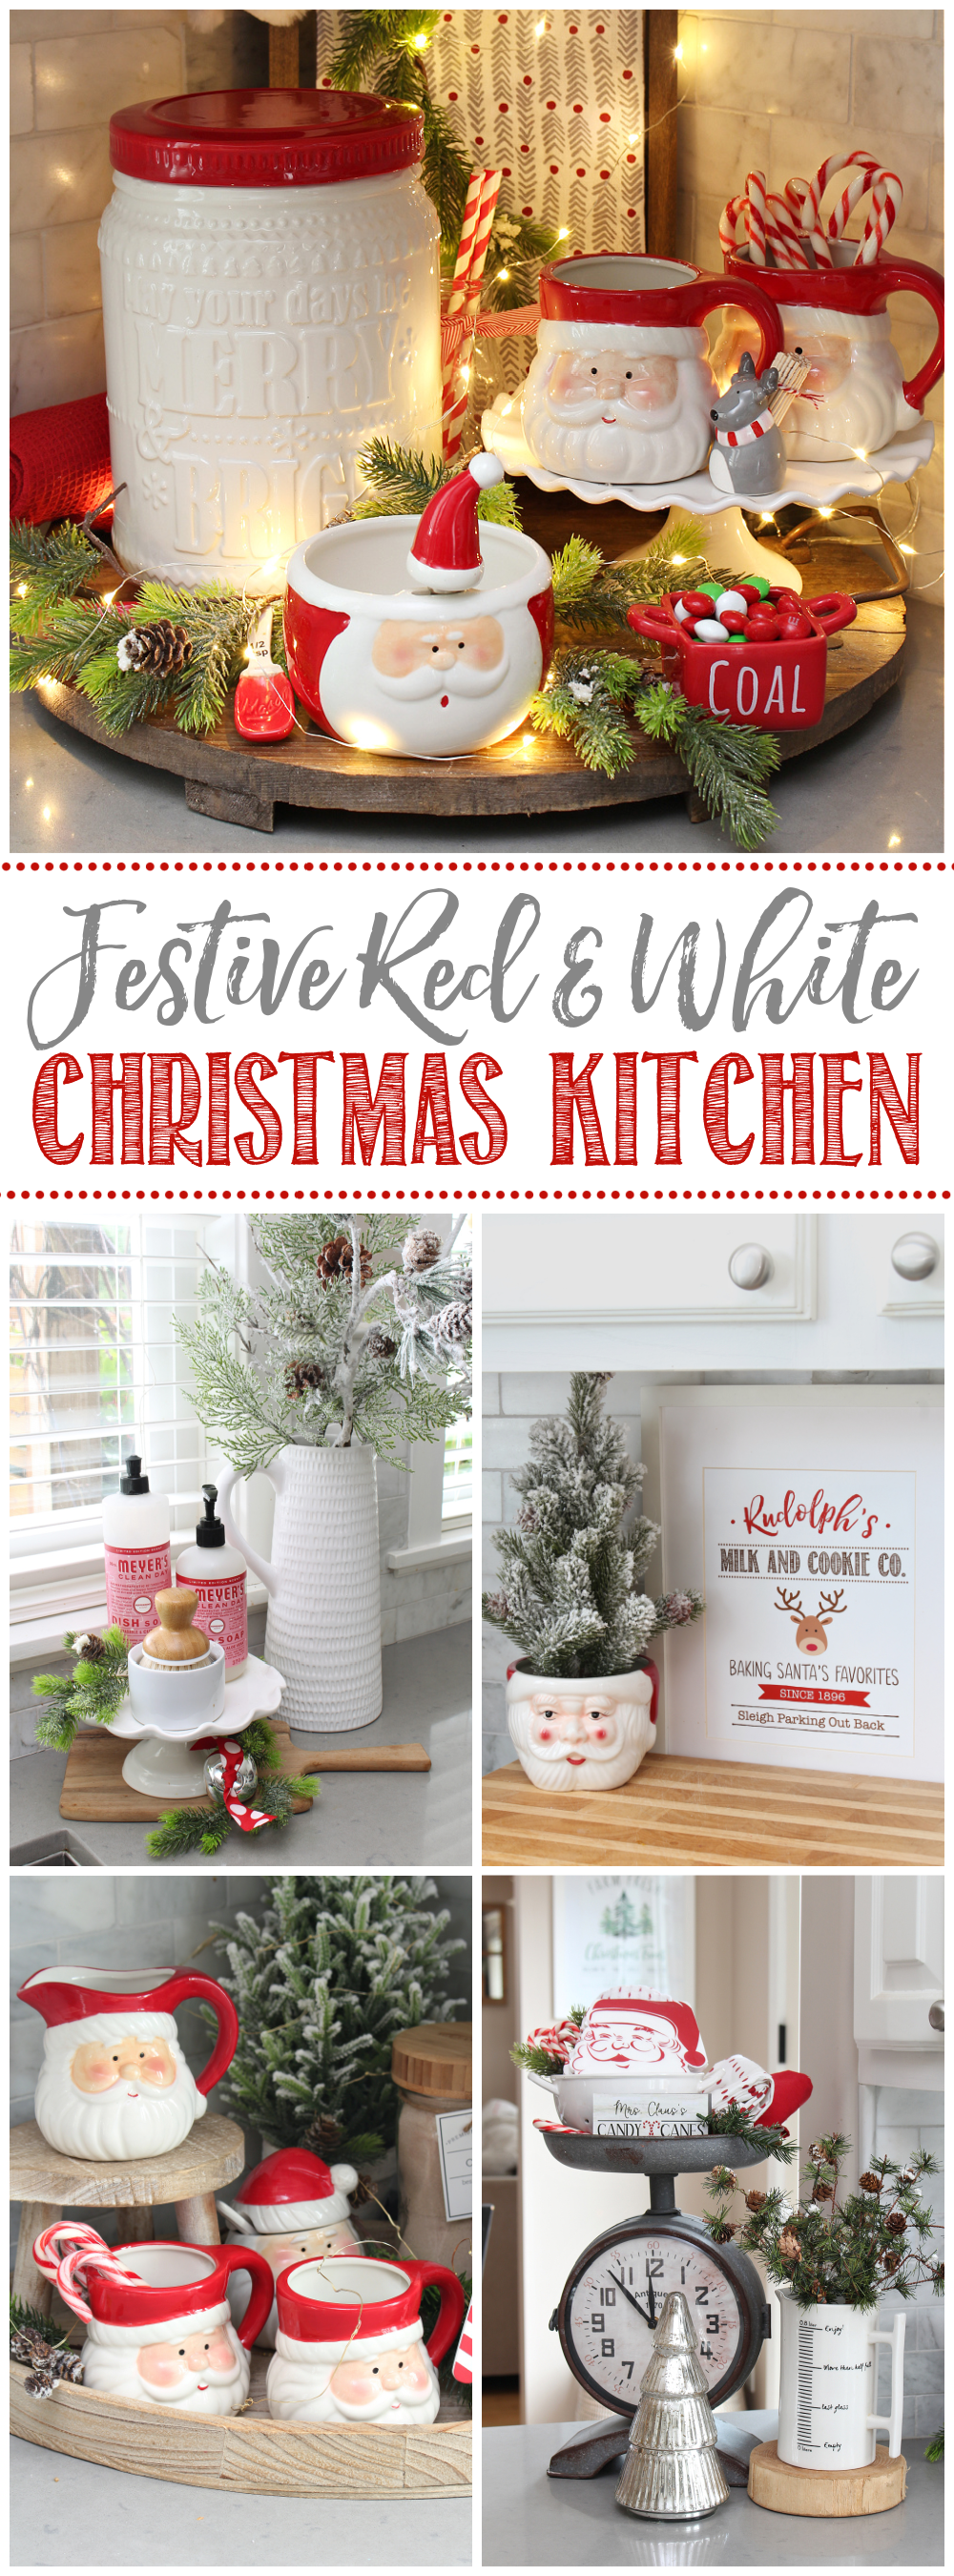 Collage of festive red and white Christmas decor ideas.